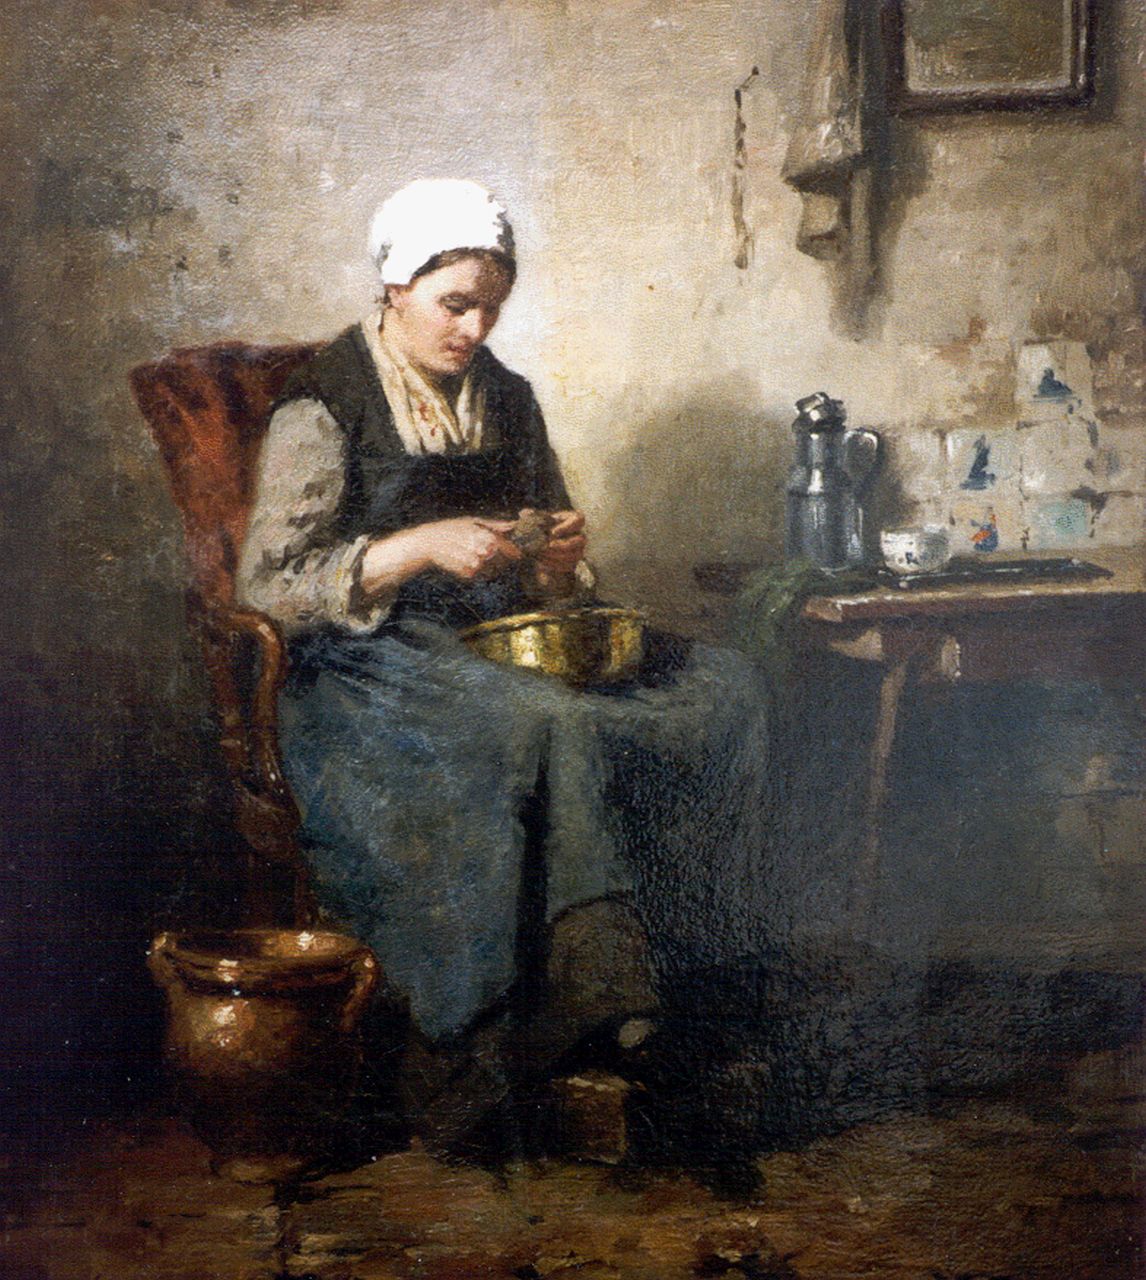 Weiland J.  | Johannes Weiland, Peeling potatoes, oil on canvas 39.8 x 34.5 cm, signed l.l.